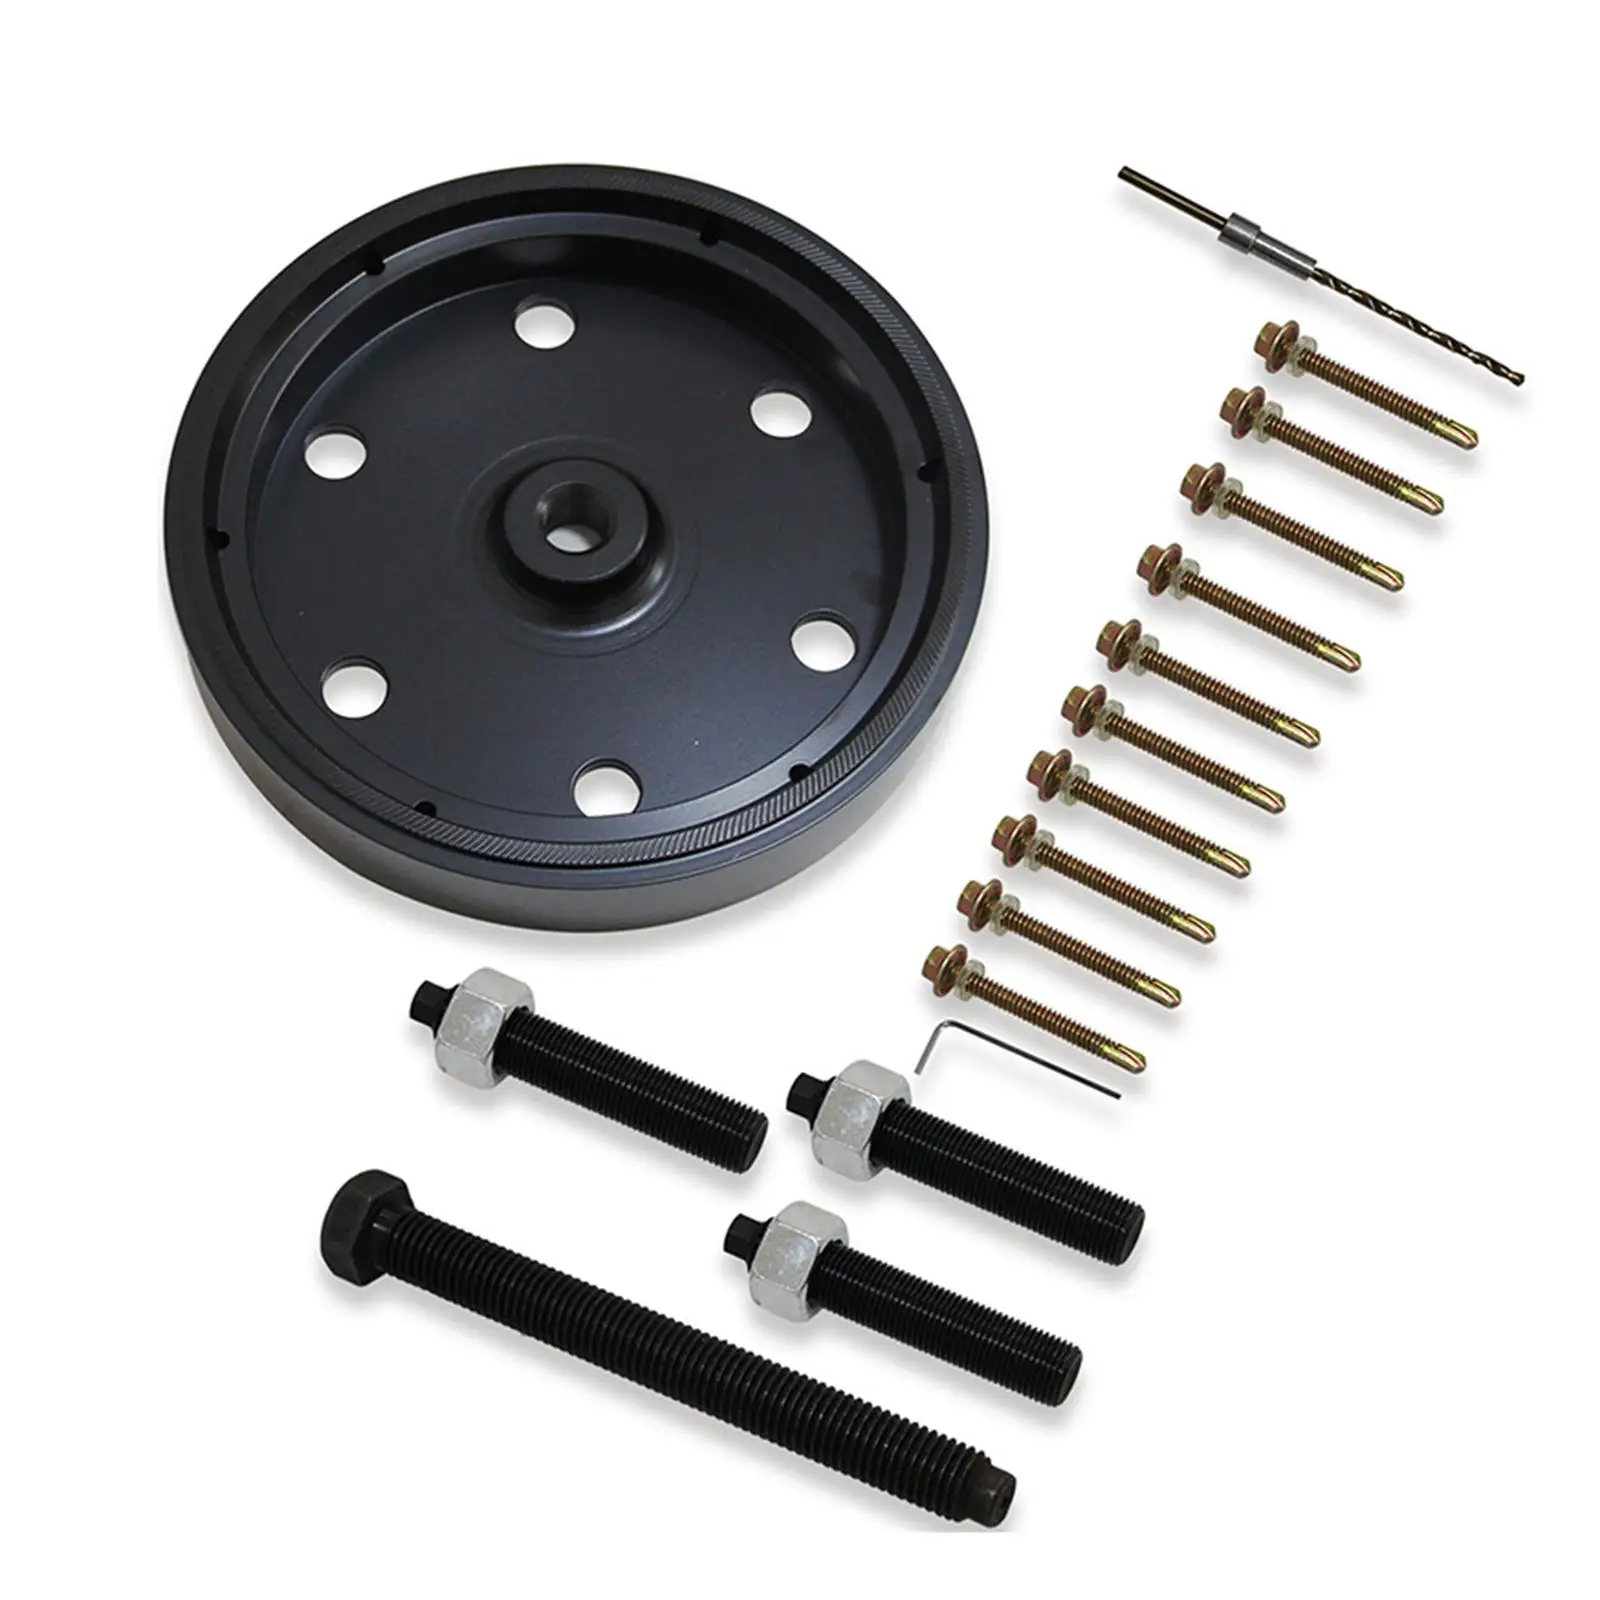 Sleeve Remover and Installer Tool Kit Equipment Replacement Easy Installation Spare 3164780 Crankshaft Rear for Cummins Isx